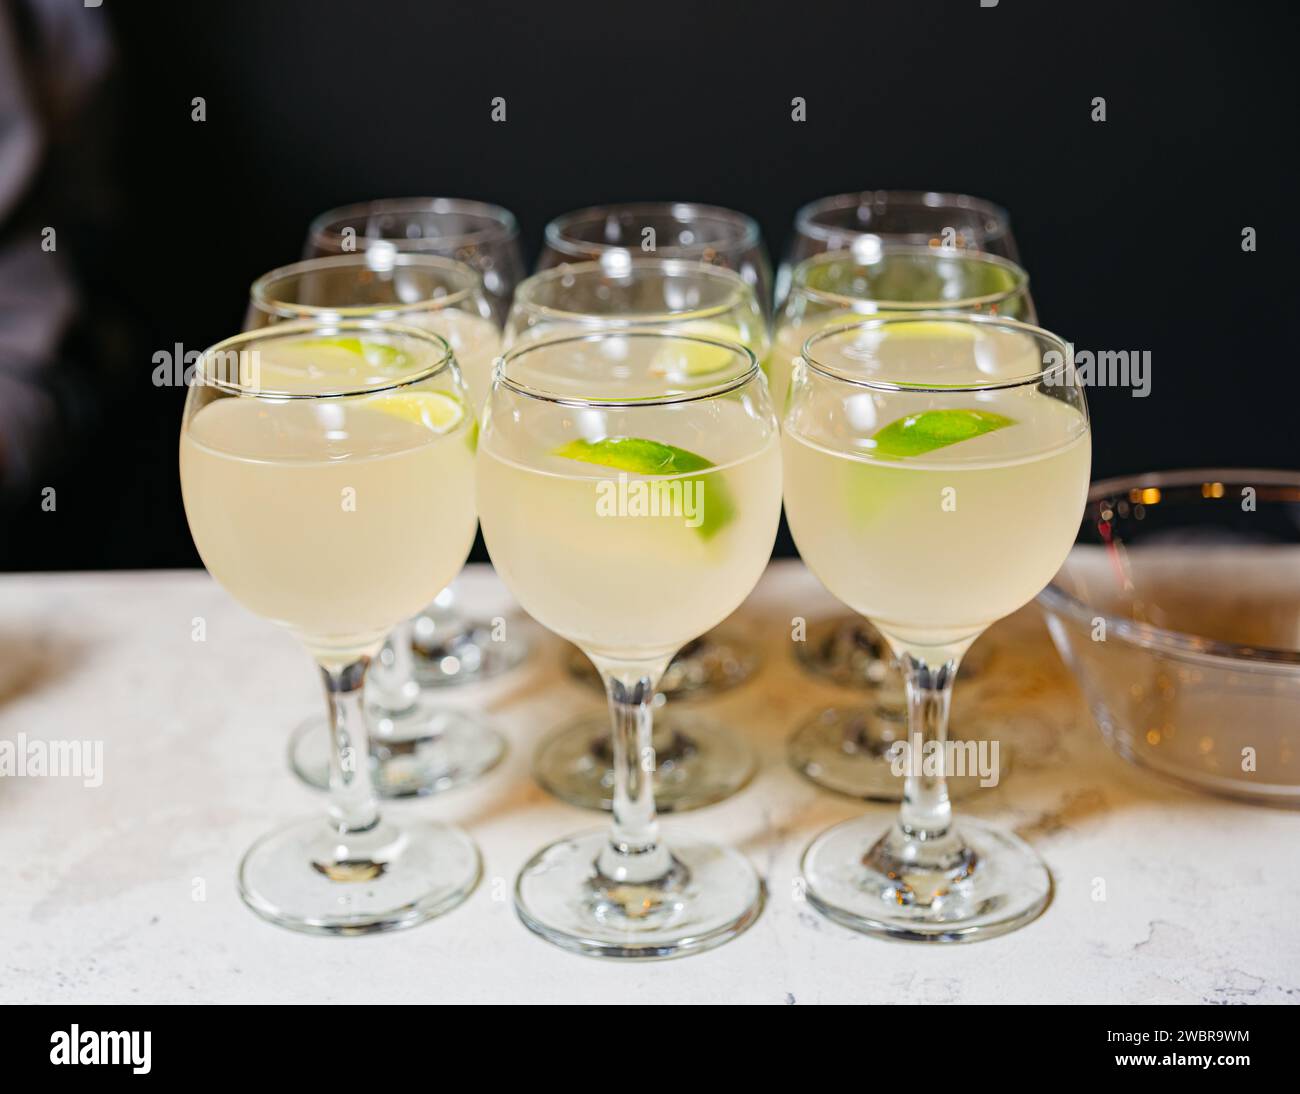 Elegant stemmed glasses filled with a cloudy lemon-lime cocktail, accented with fresh lime garnishes against a dark background. Stock Photo